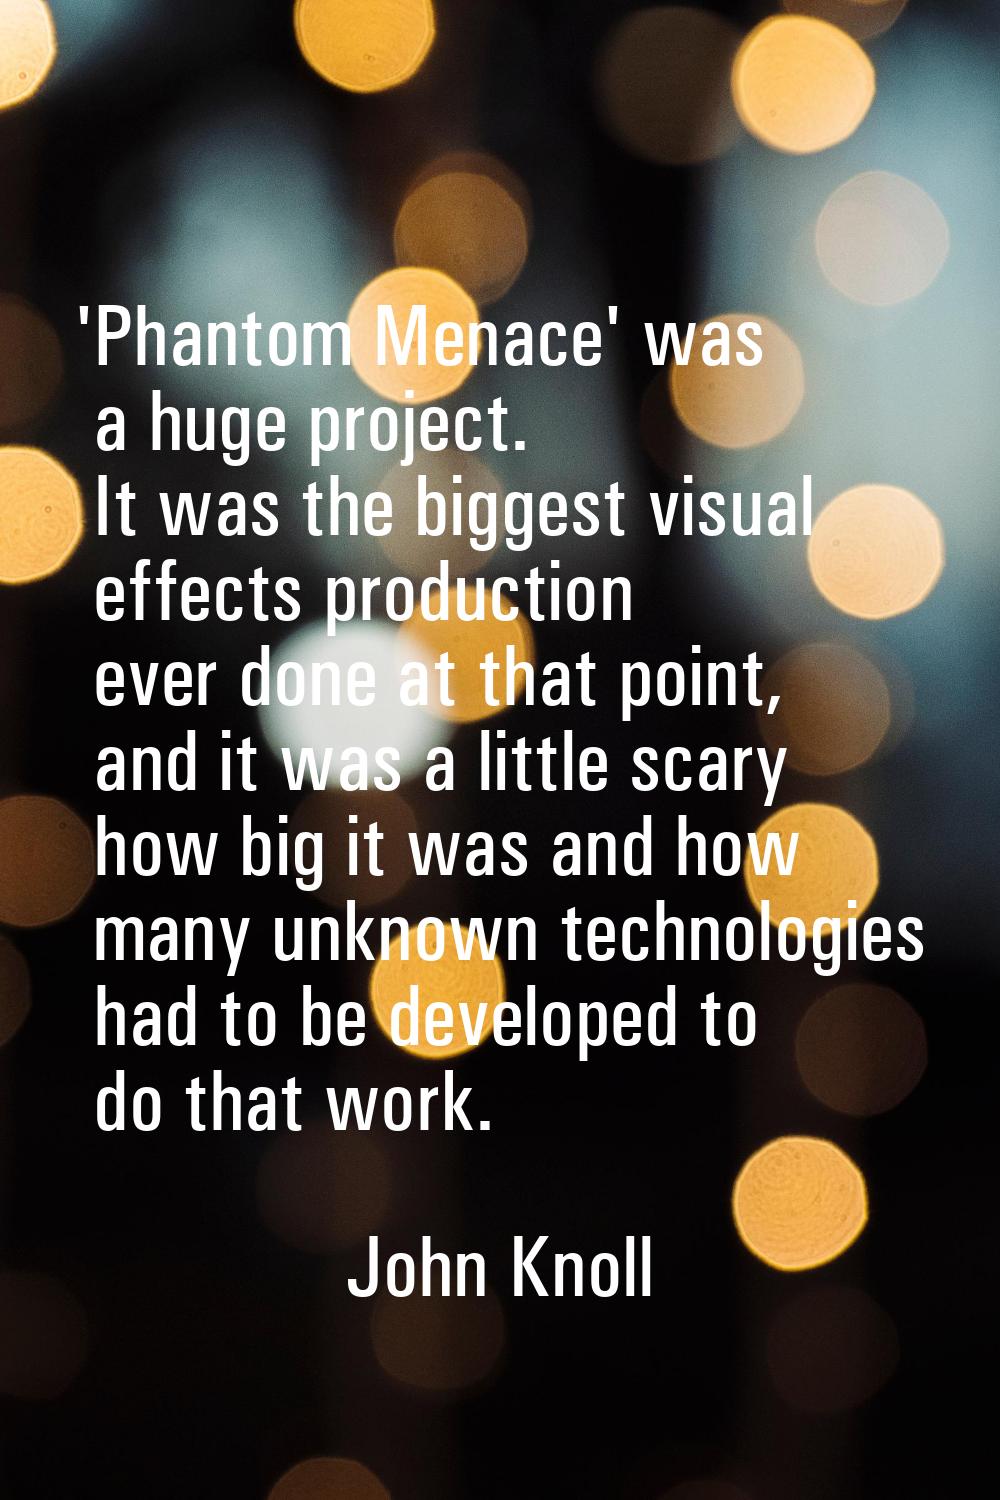 'Phantom Menace' was a huge project. It was the biggest visual effects production ever done at that